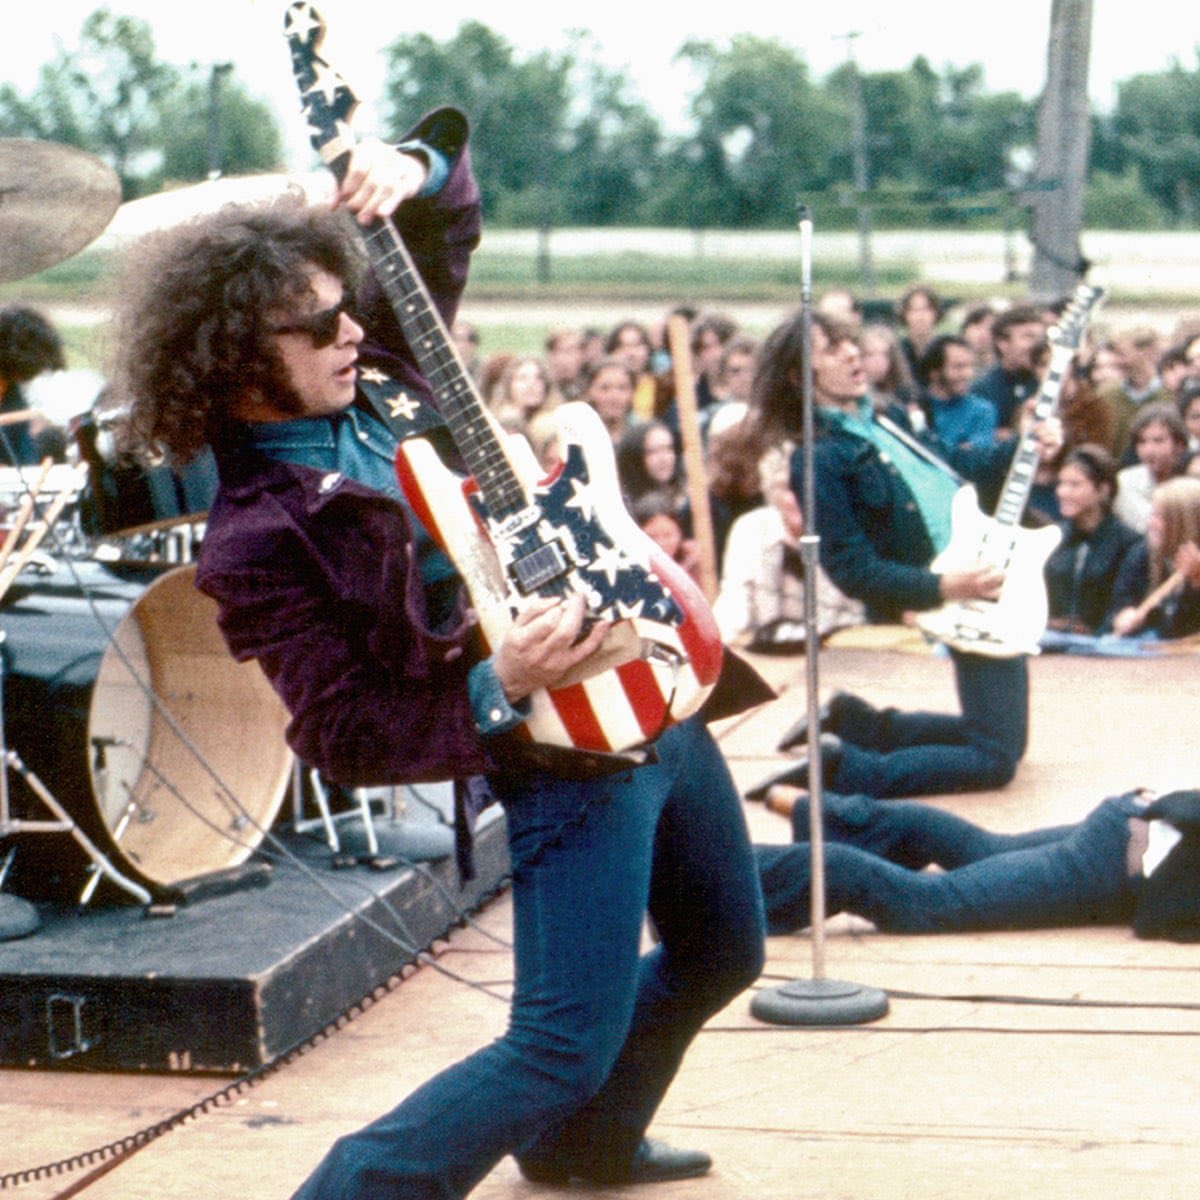 There will never be another band like the MC5 RIP Wayne Kramer